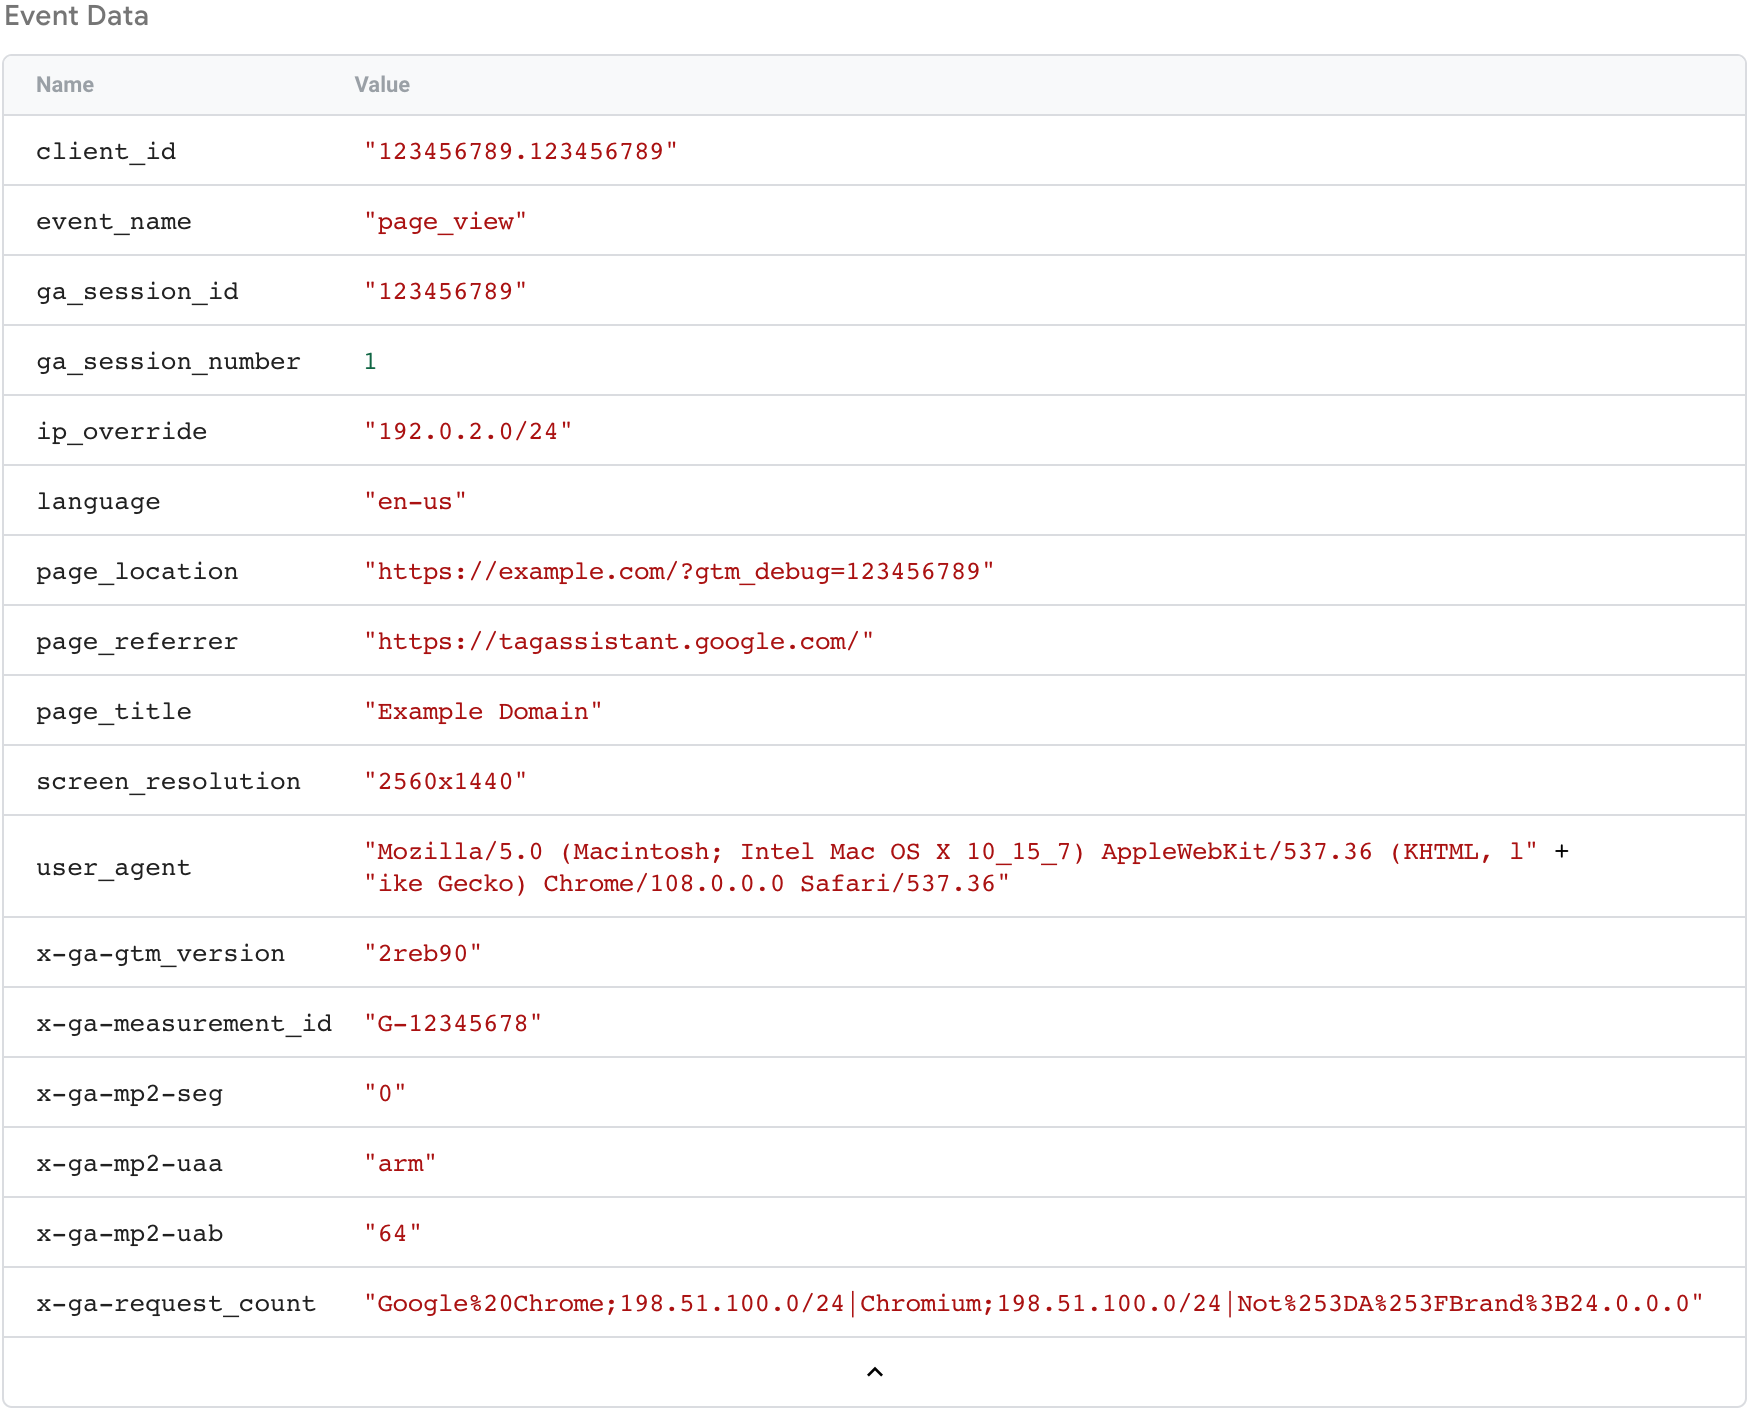 A screenshot of all the parameters in an event data object based off of the incoming request.